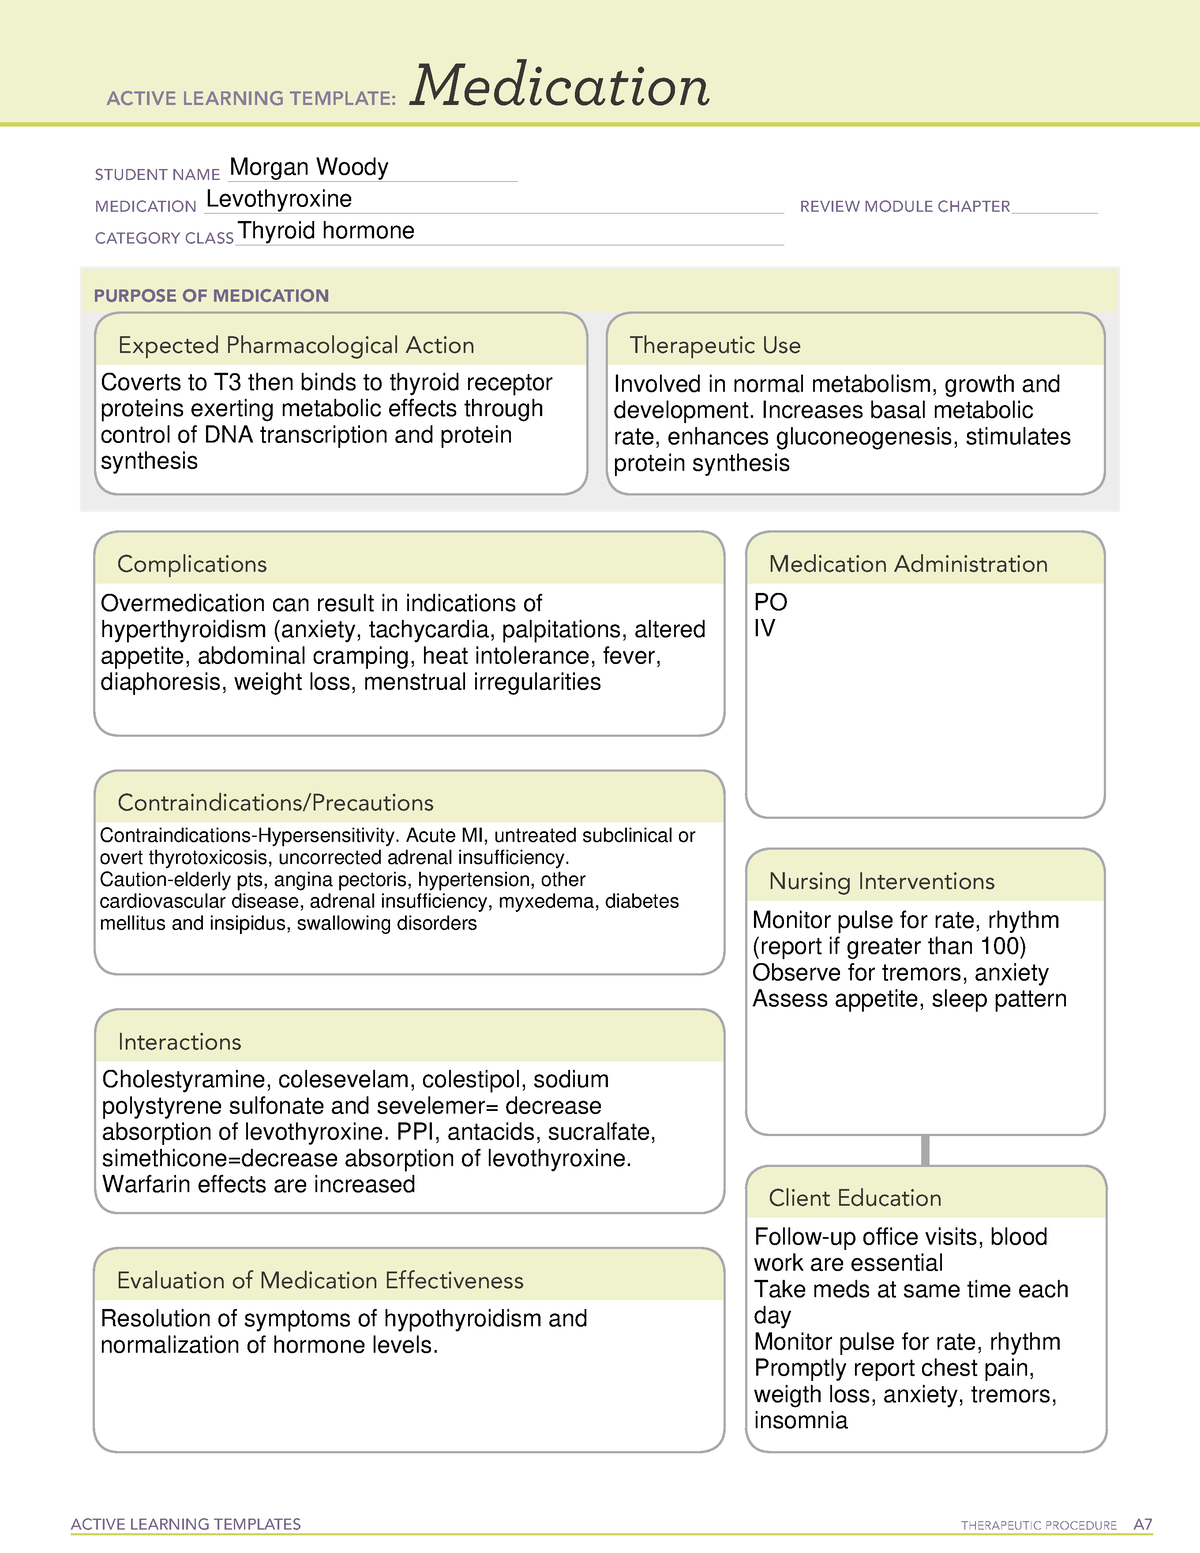 Levothyroxine Med Sheet ACTIVE LEARNING TEMPLATES THERAPEUTIC